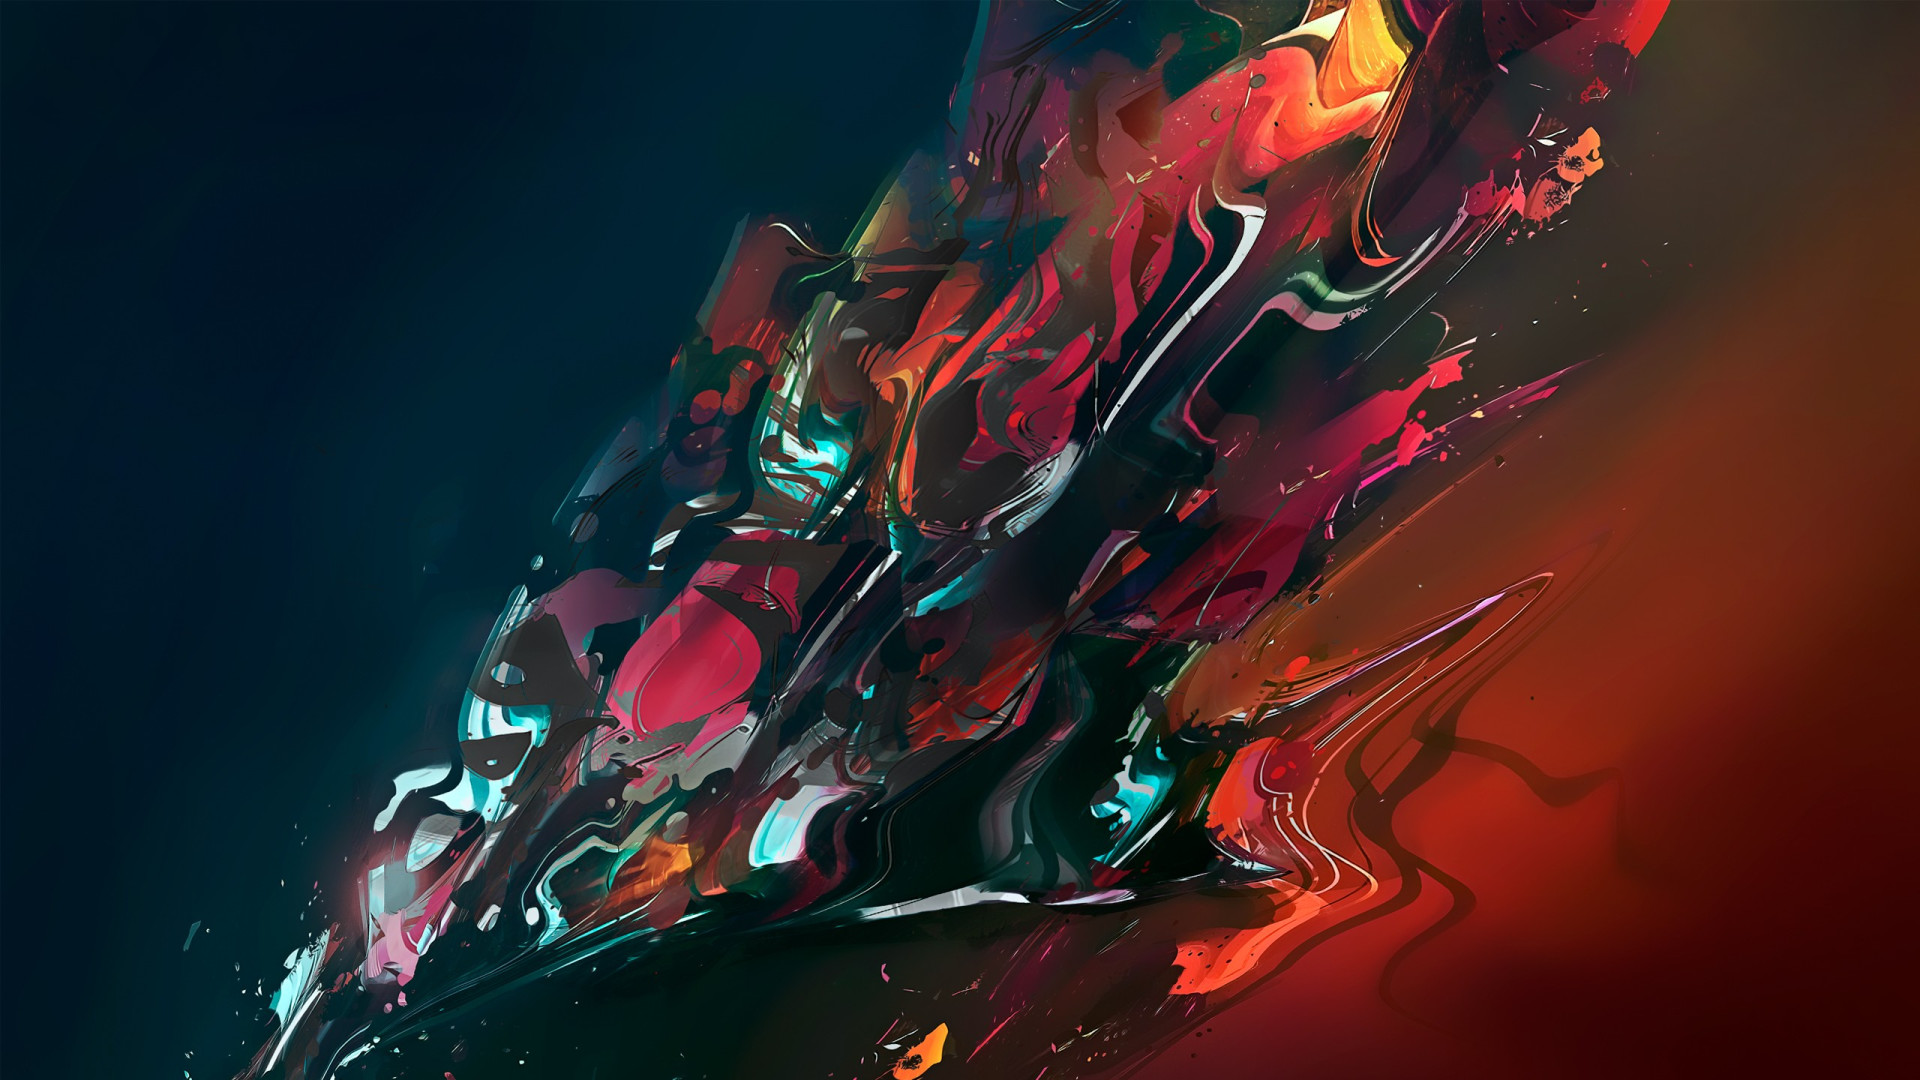 1920x1080 Abstract color cgi painting art wallpaper |  | 51885 | WallpaperUP